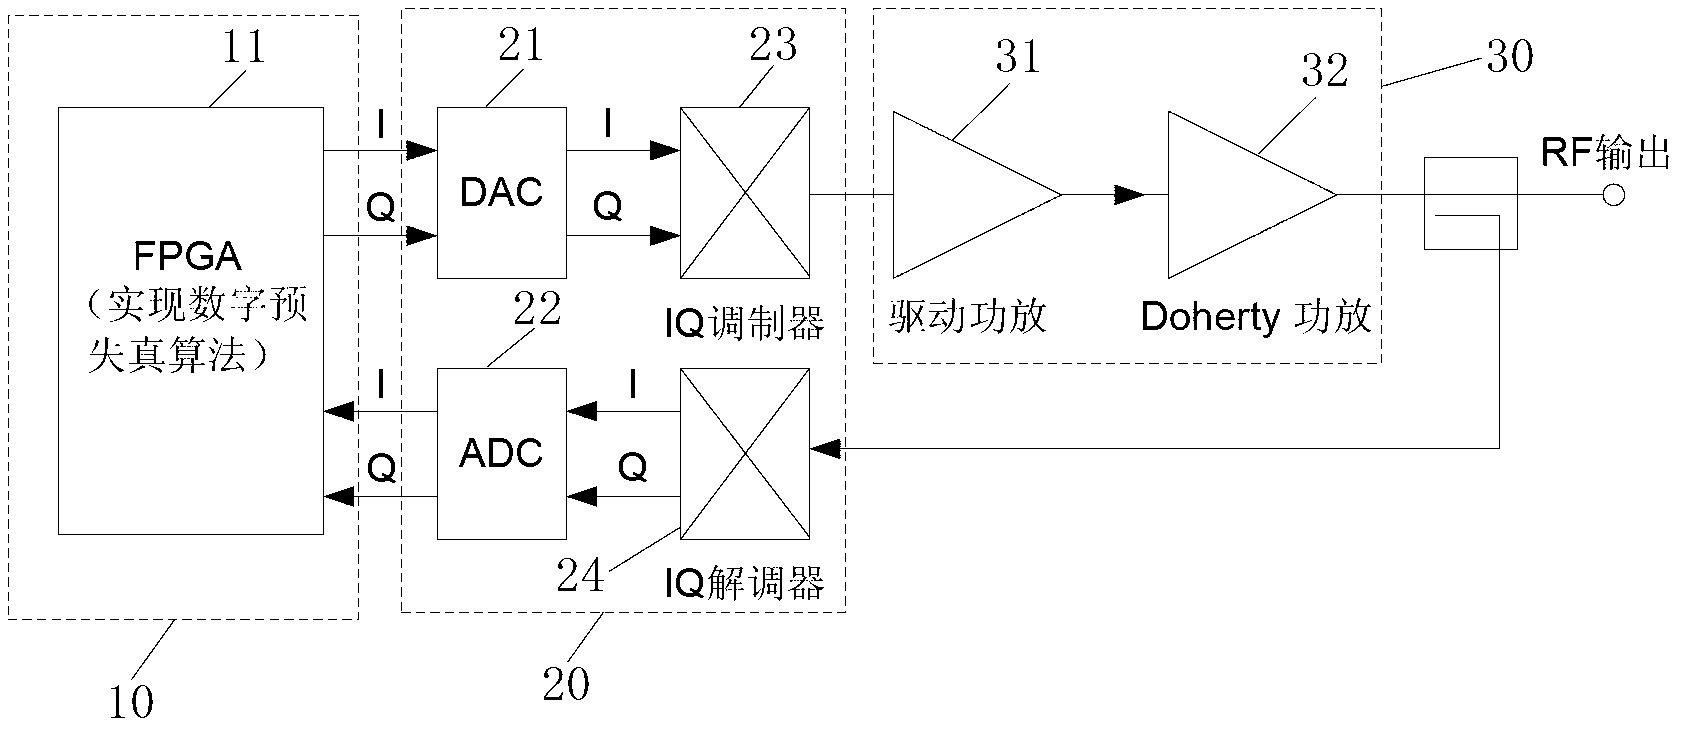 Radio frequency power amplification device